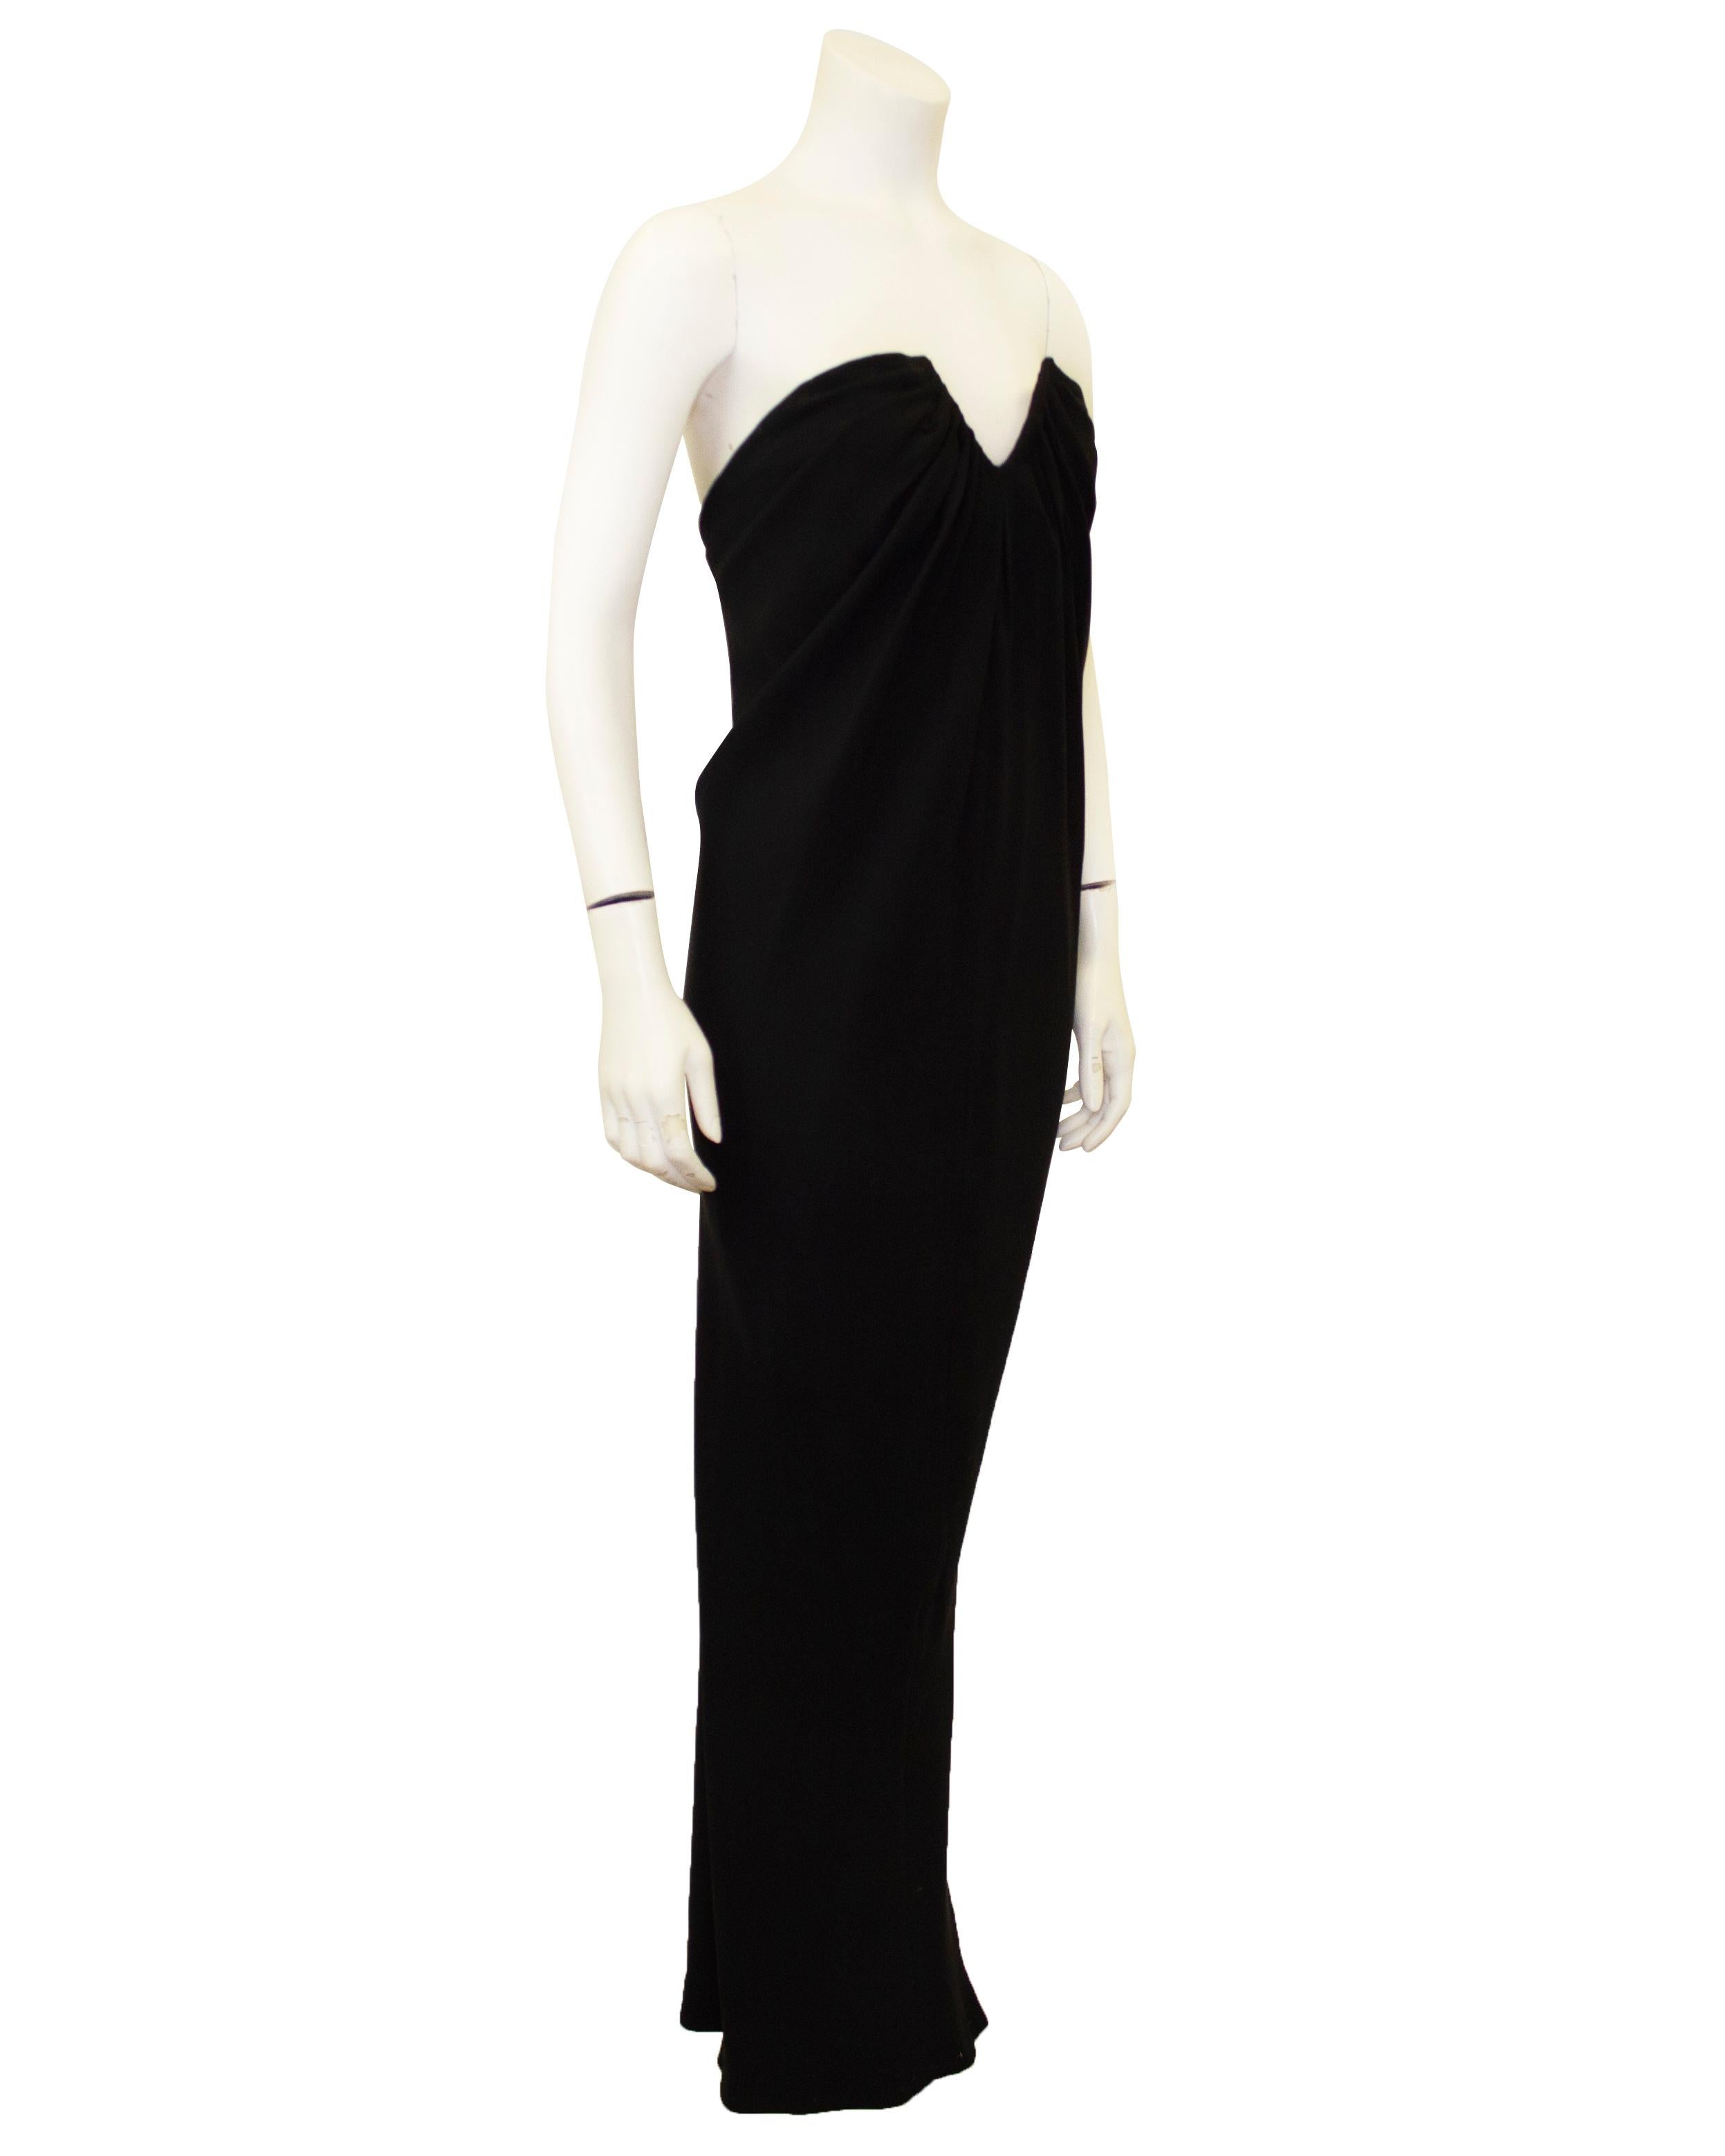 Sleek and sexy Carolyne Roehm black silk gown from the 1980s. Strapless with a u shaped cut out at the bust. The fabric ruches around the cut-out creating outward draping. Skirt skims the body and tapers at the bottom in a slight cocoon shape.